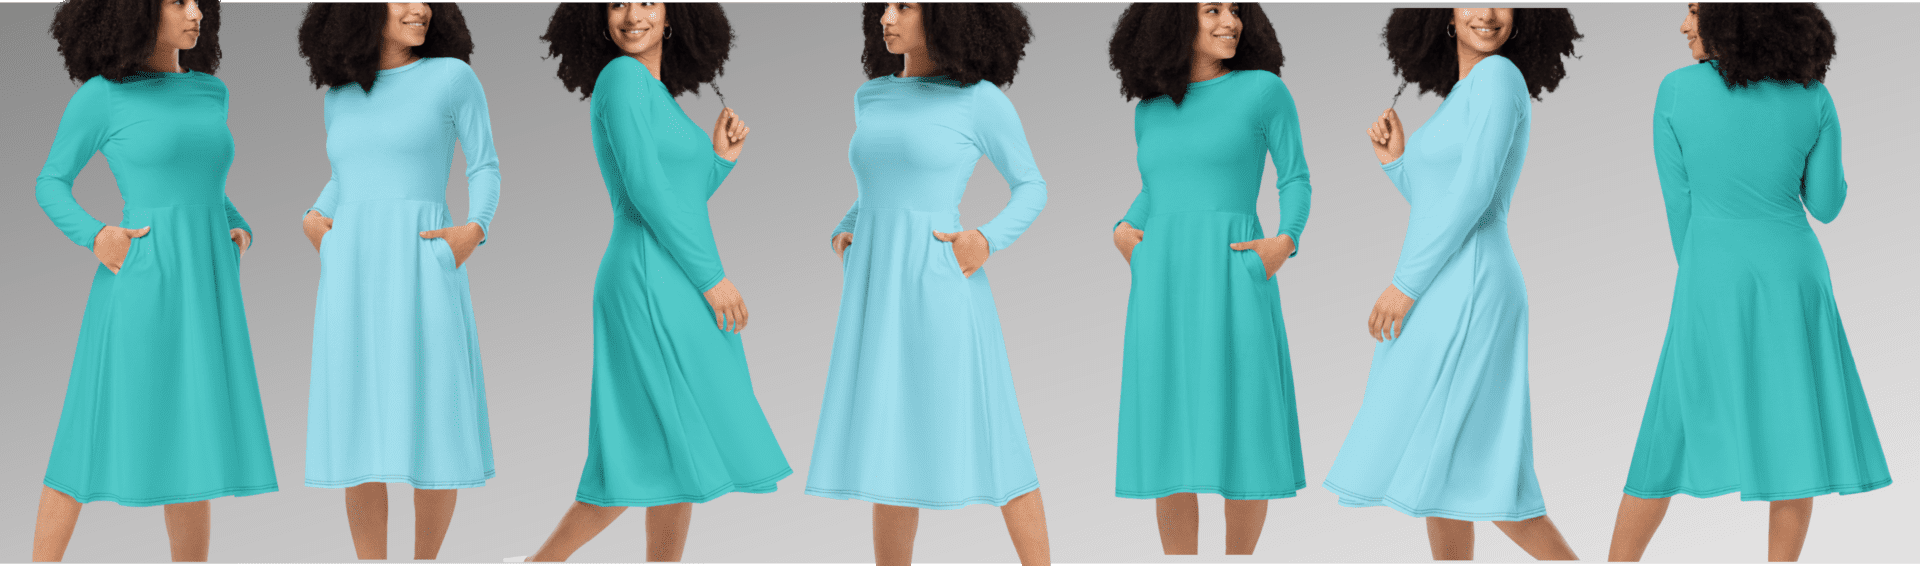 Women in blue and teal dresses with pockets.